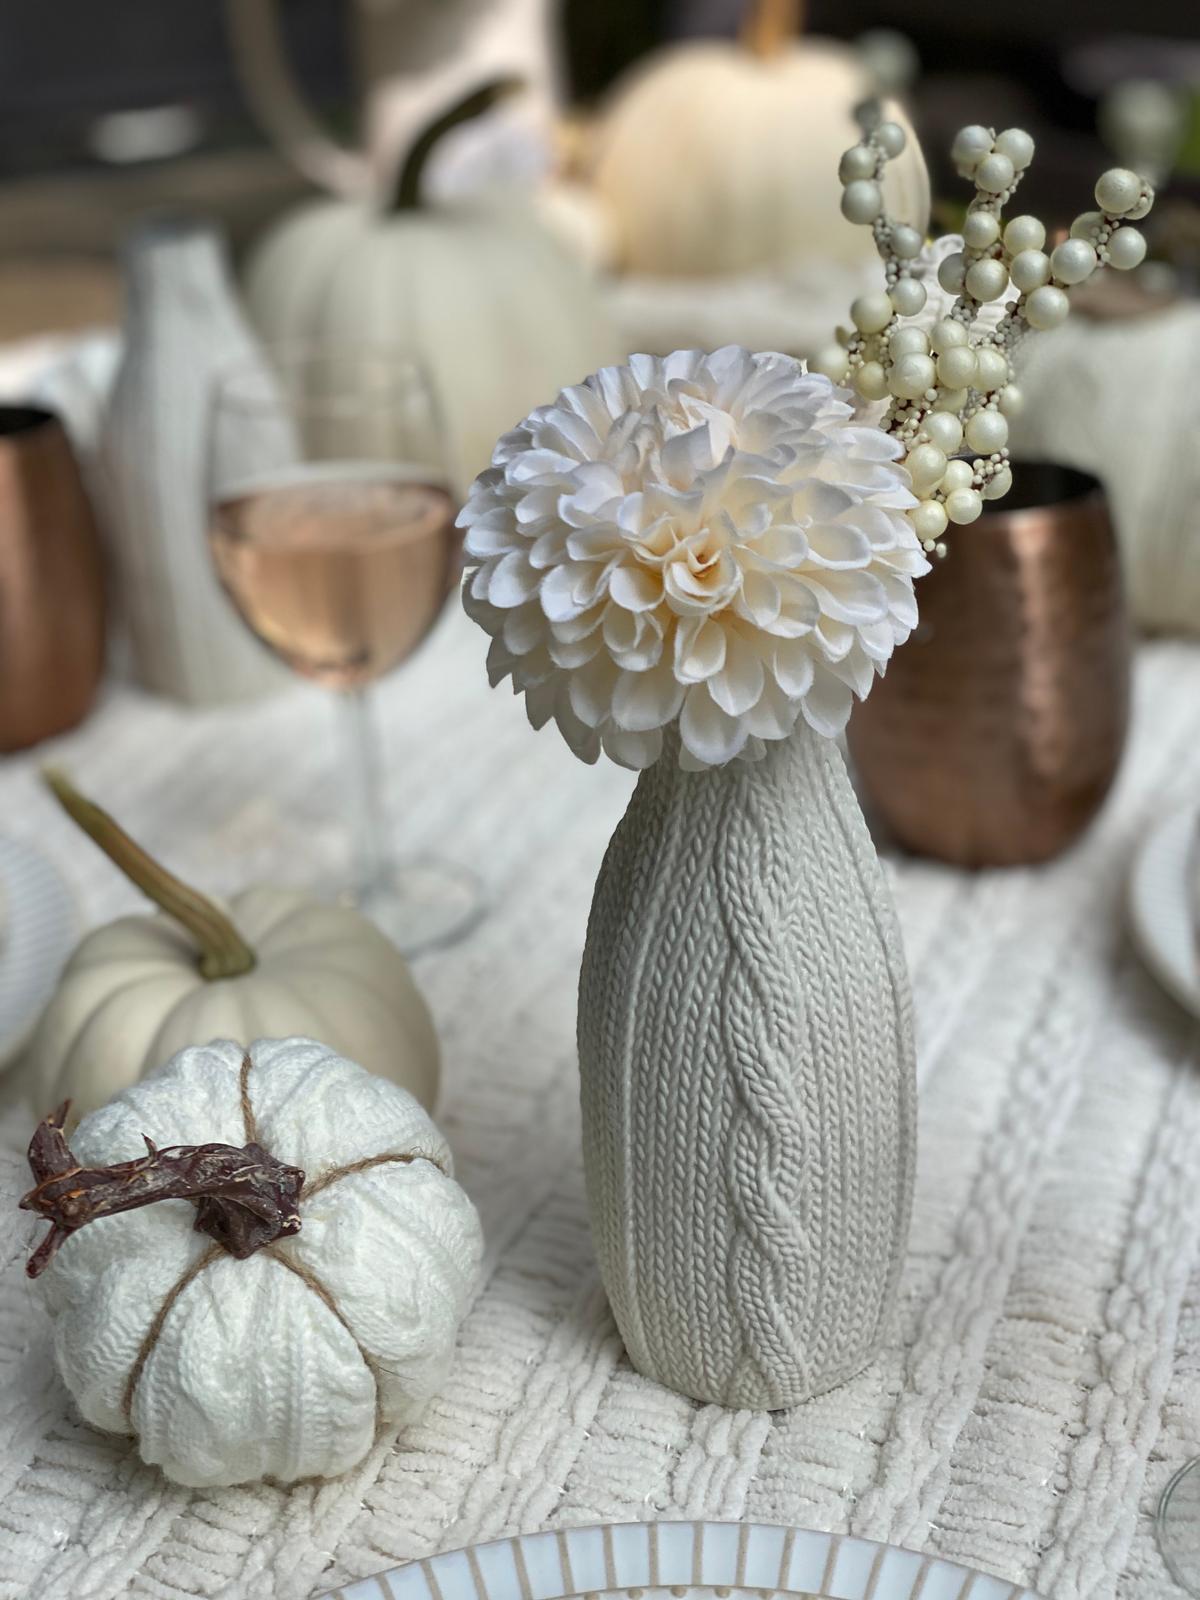 Mini knitted pumpkins and vases adorn the table. (Courtesy of Yelena Oleynik)